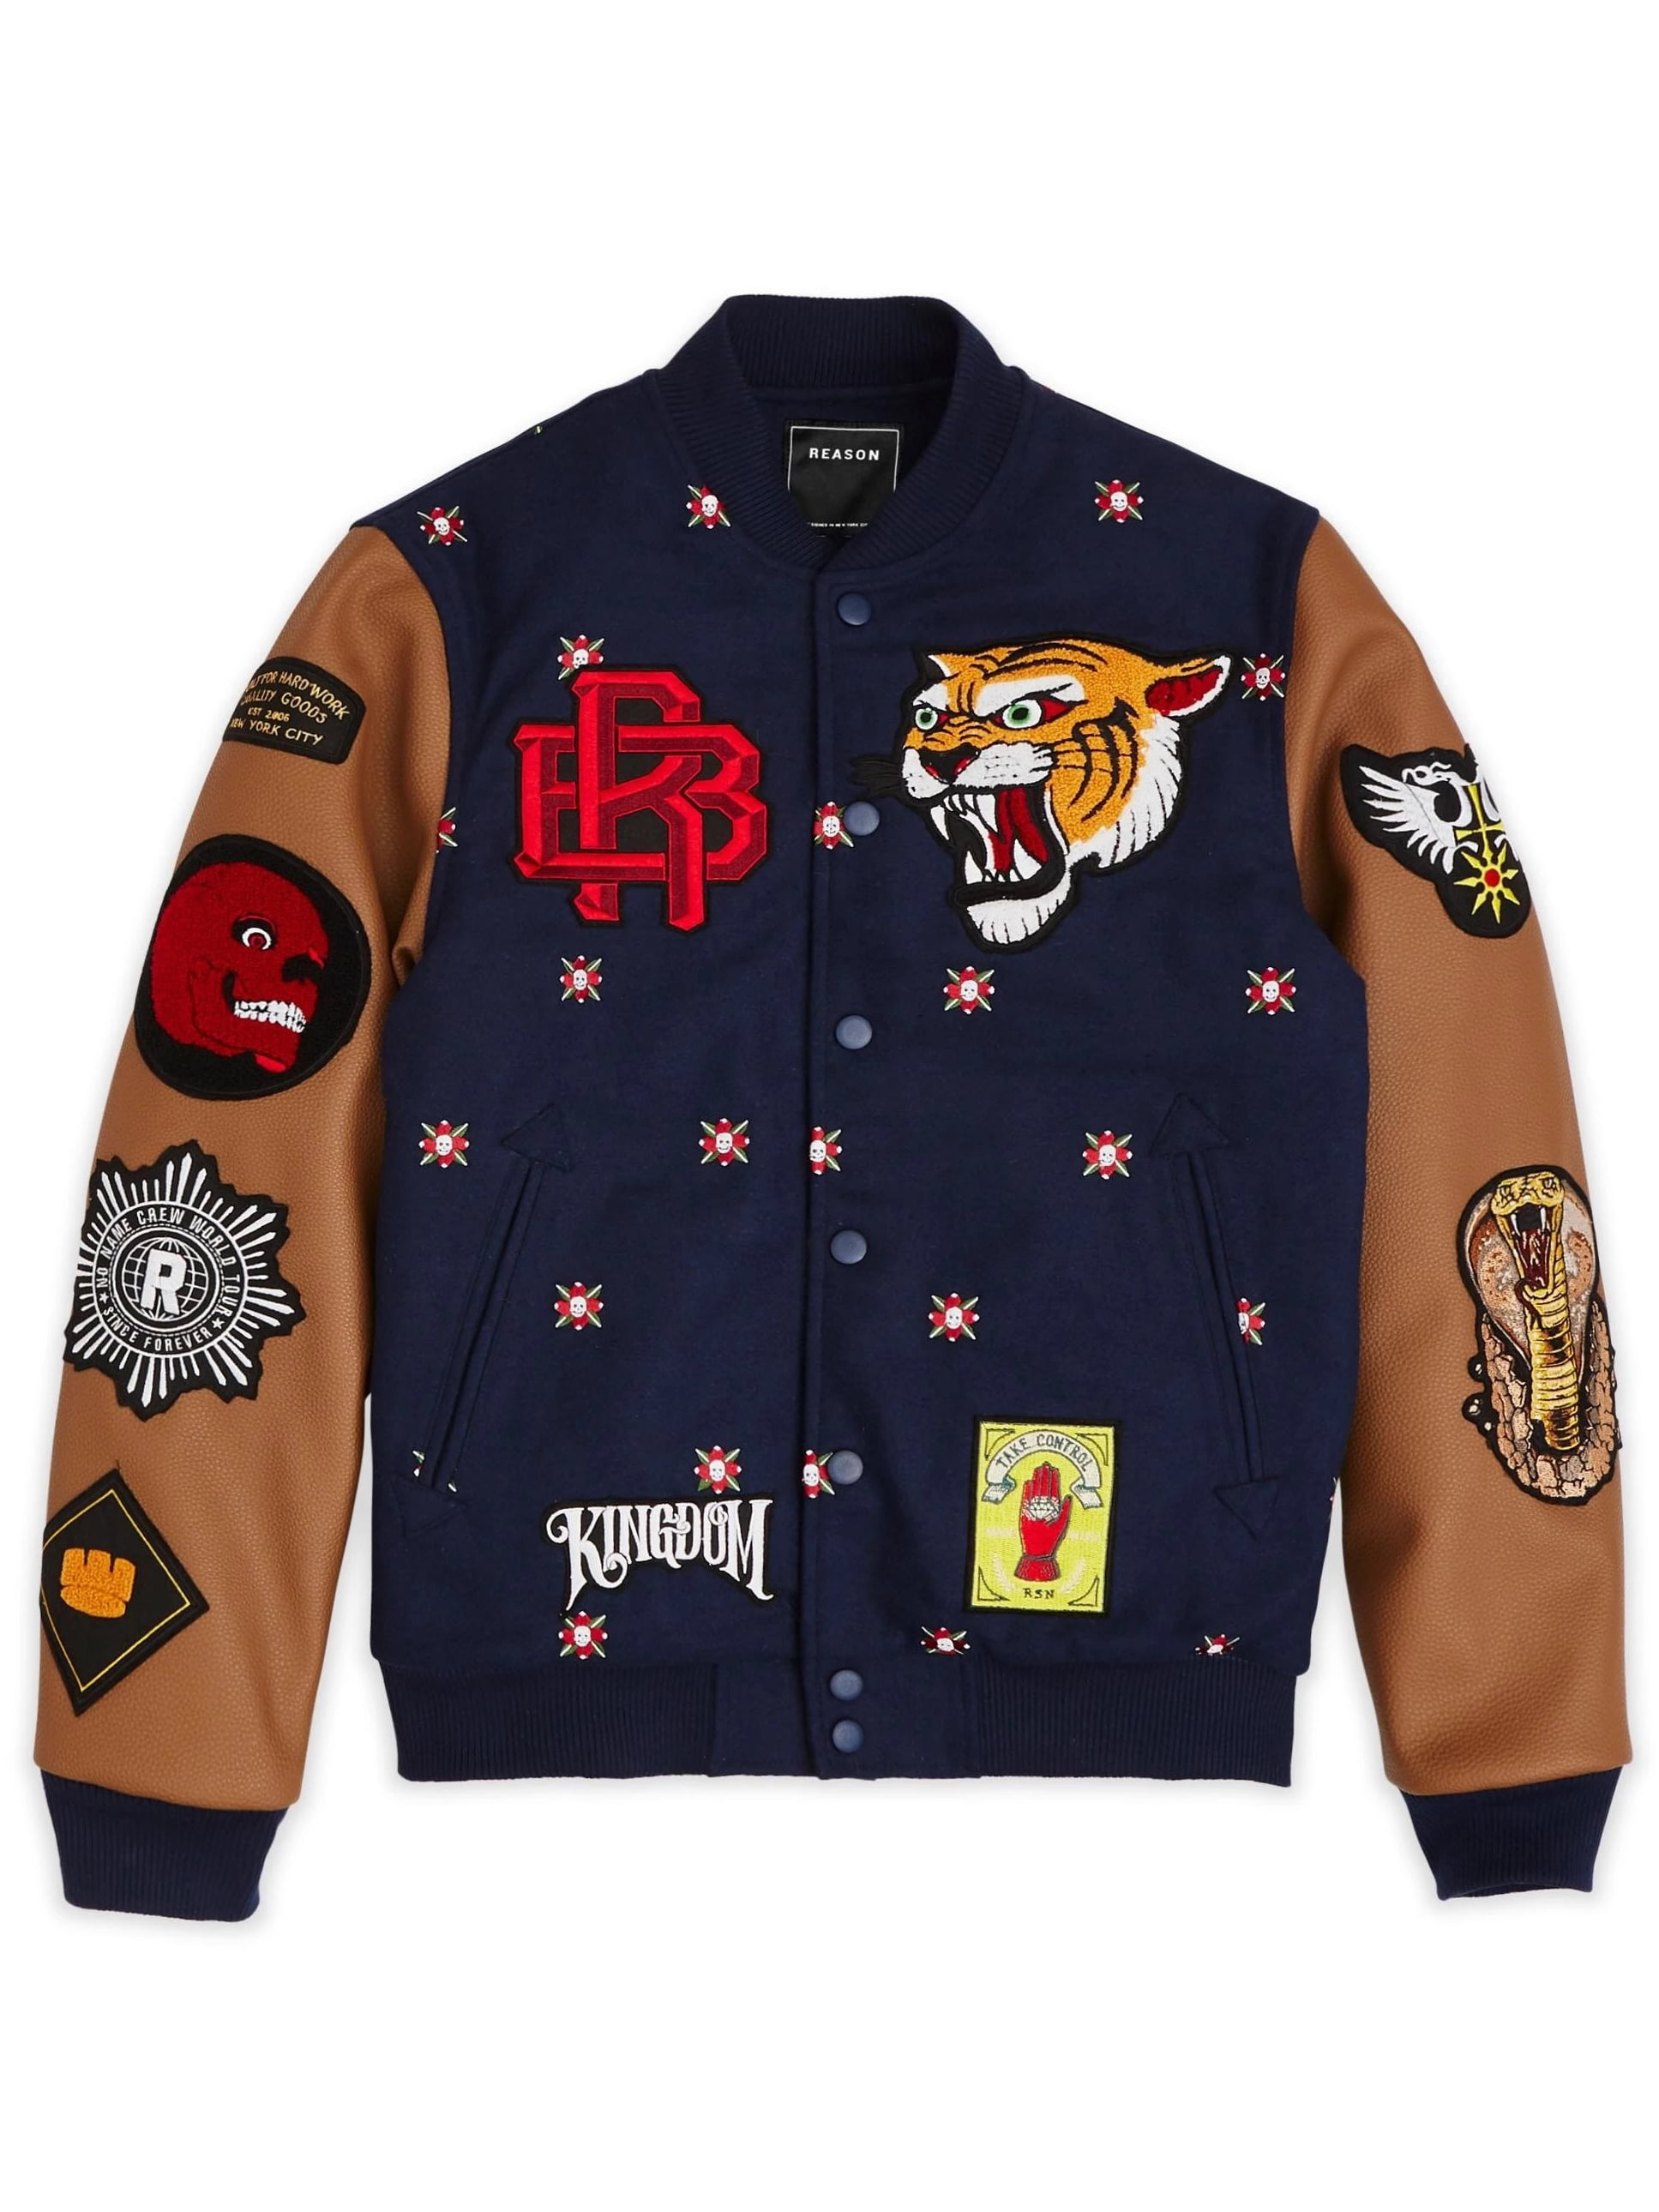 Mens Embroidered Varsity Jacket with Faux Leather Sleeves and Chenille  Embroidered Patches